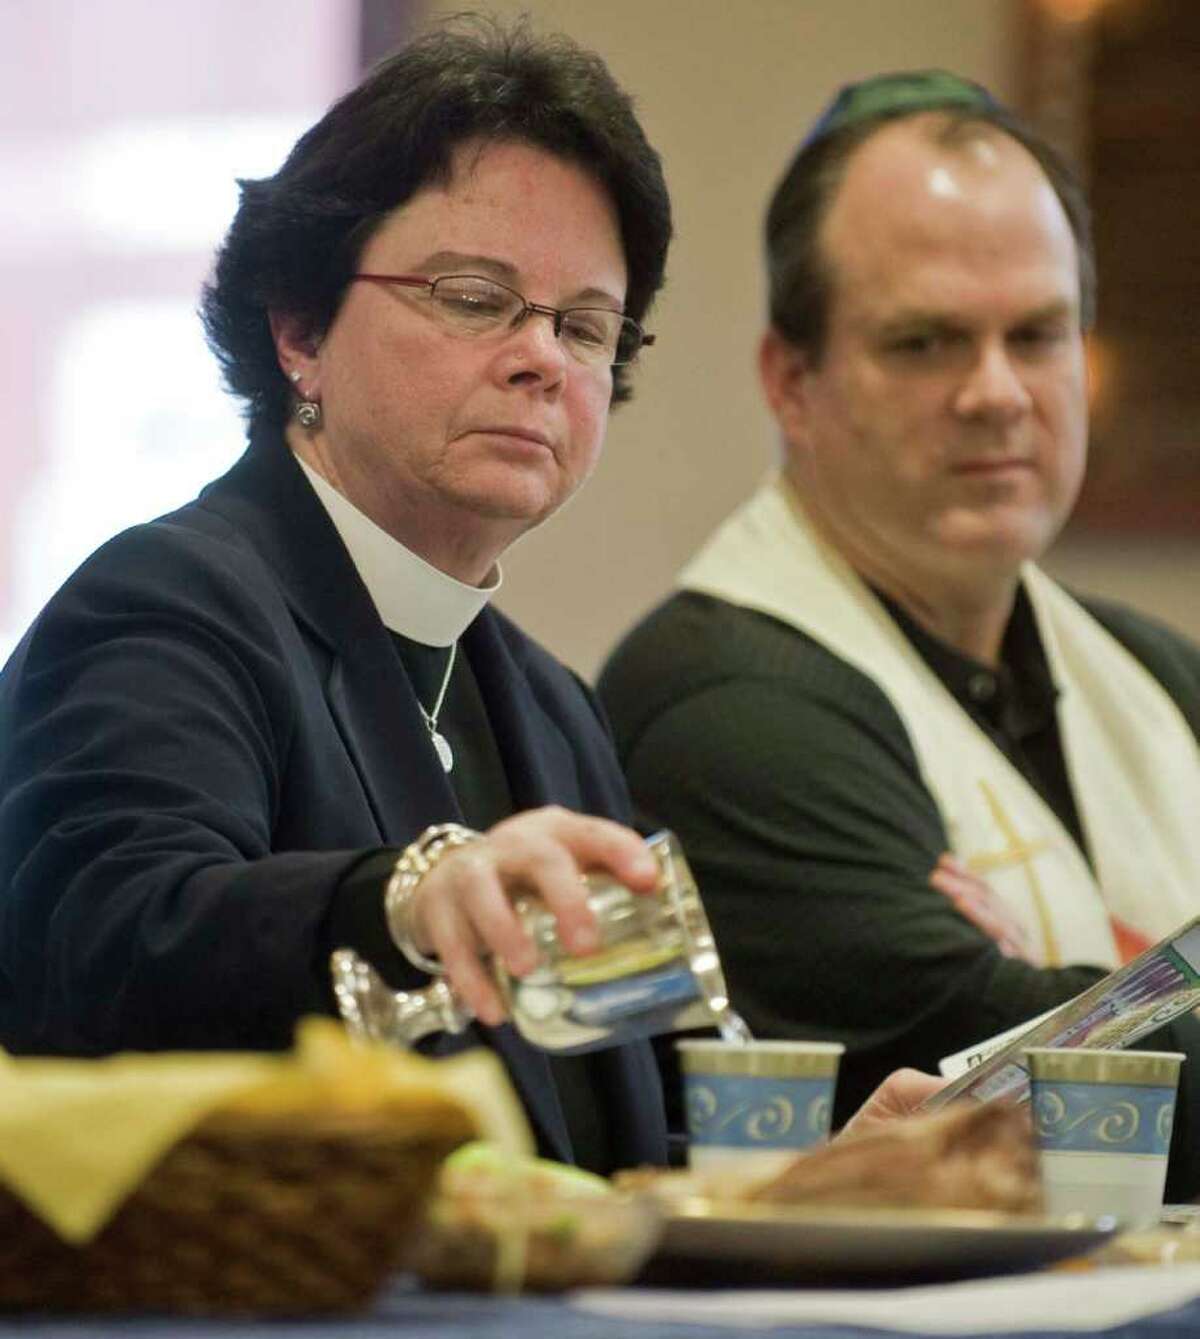 Rev. Kathleen Adams-Shephard of Trinity Episcopal Church pours water as part of the Passover Seder while Rev. Matt Crebbin of the Newtown Congregational Church observes during an interfaith celebration at Congregation Adath Israel in Newtown Sunday, April 10, 2011